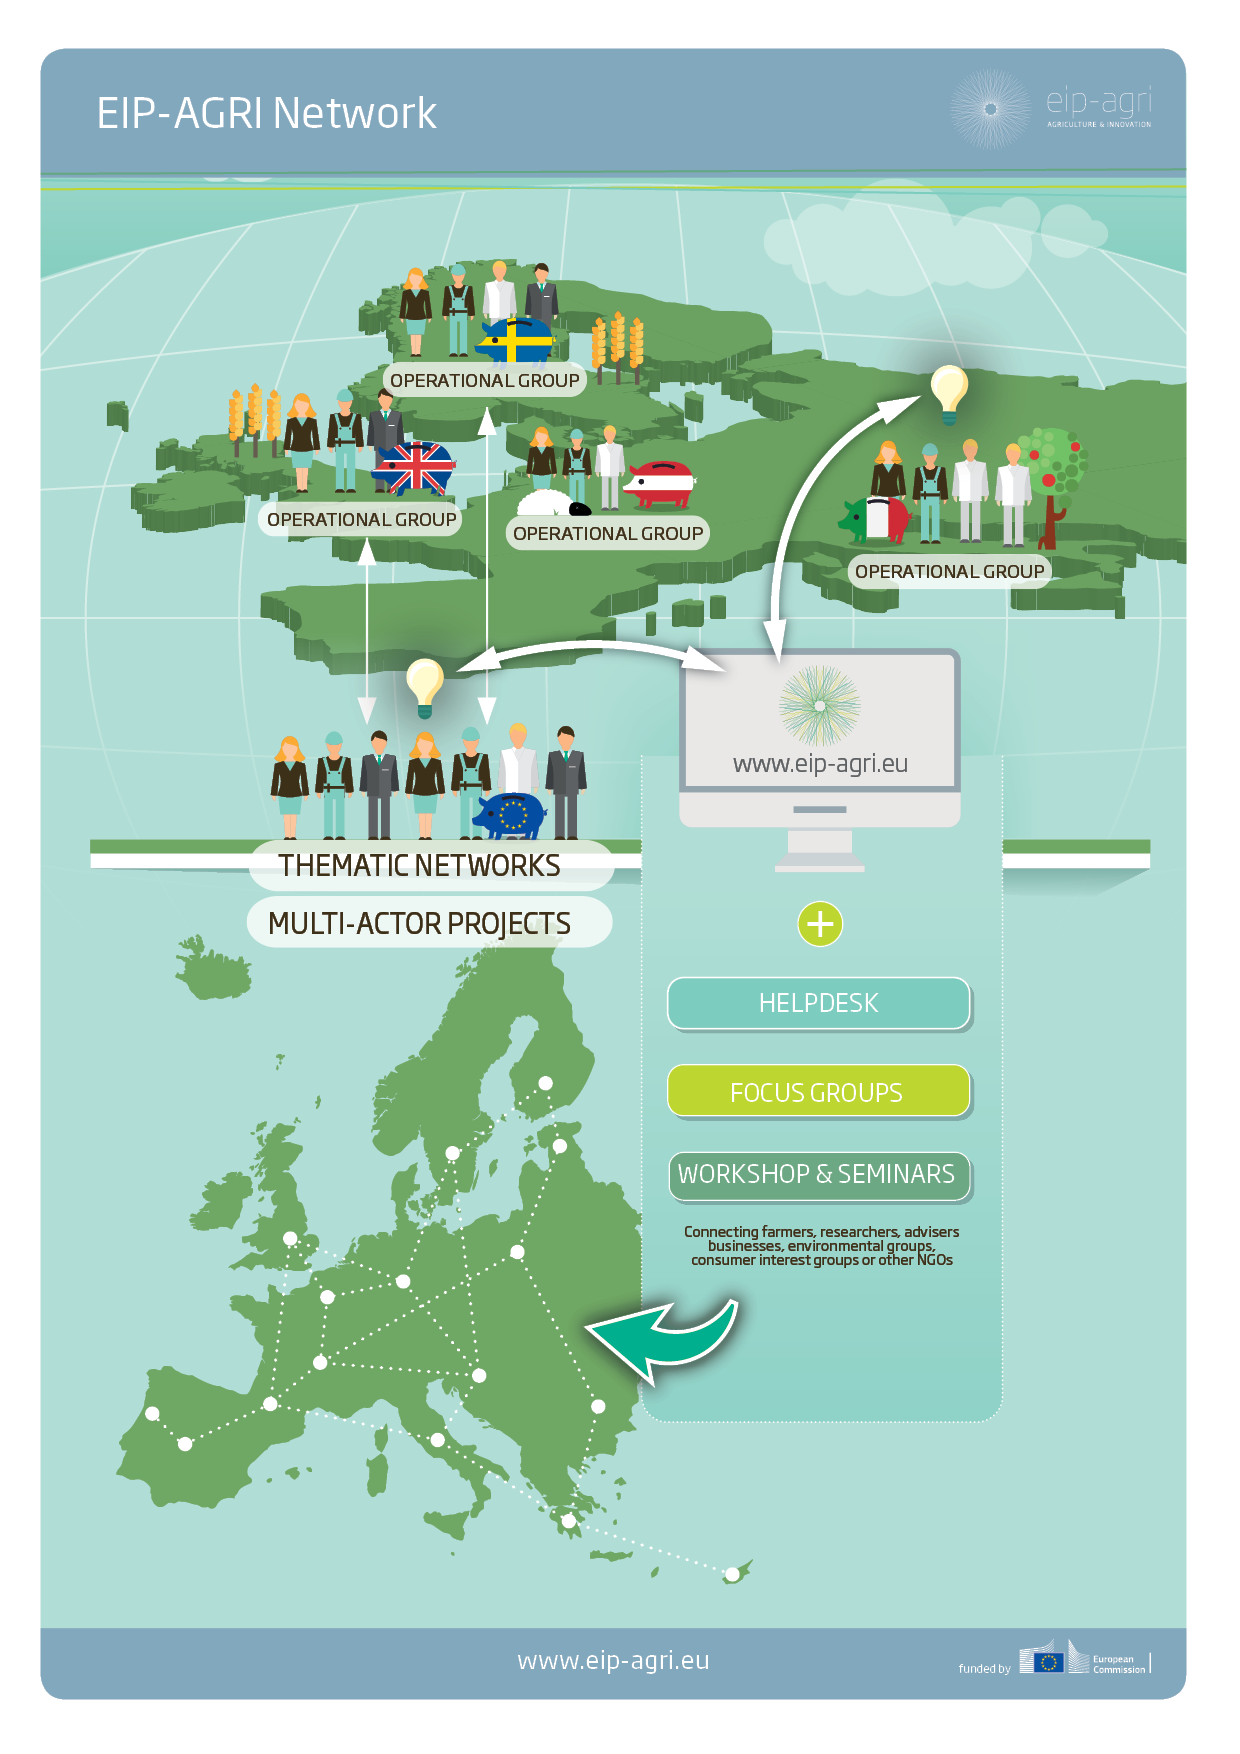 eip-agri_infographic_network_2015_en_0.png